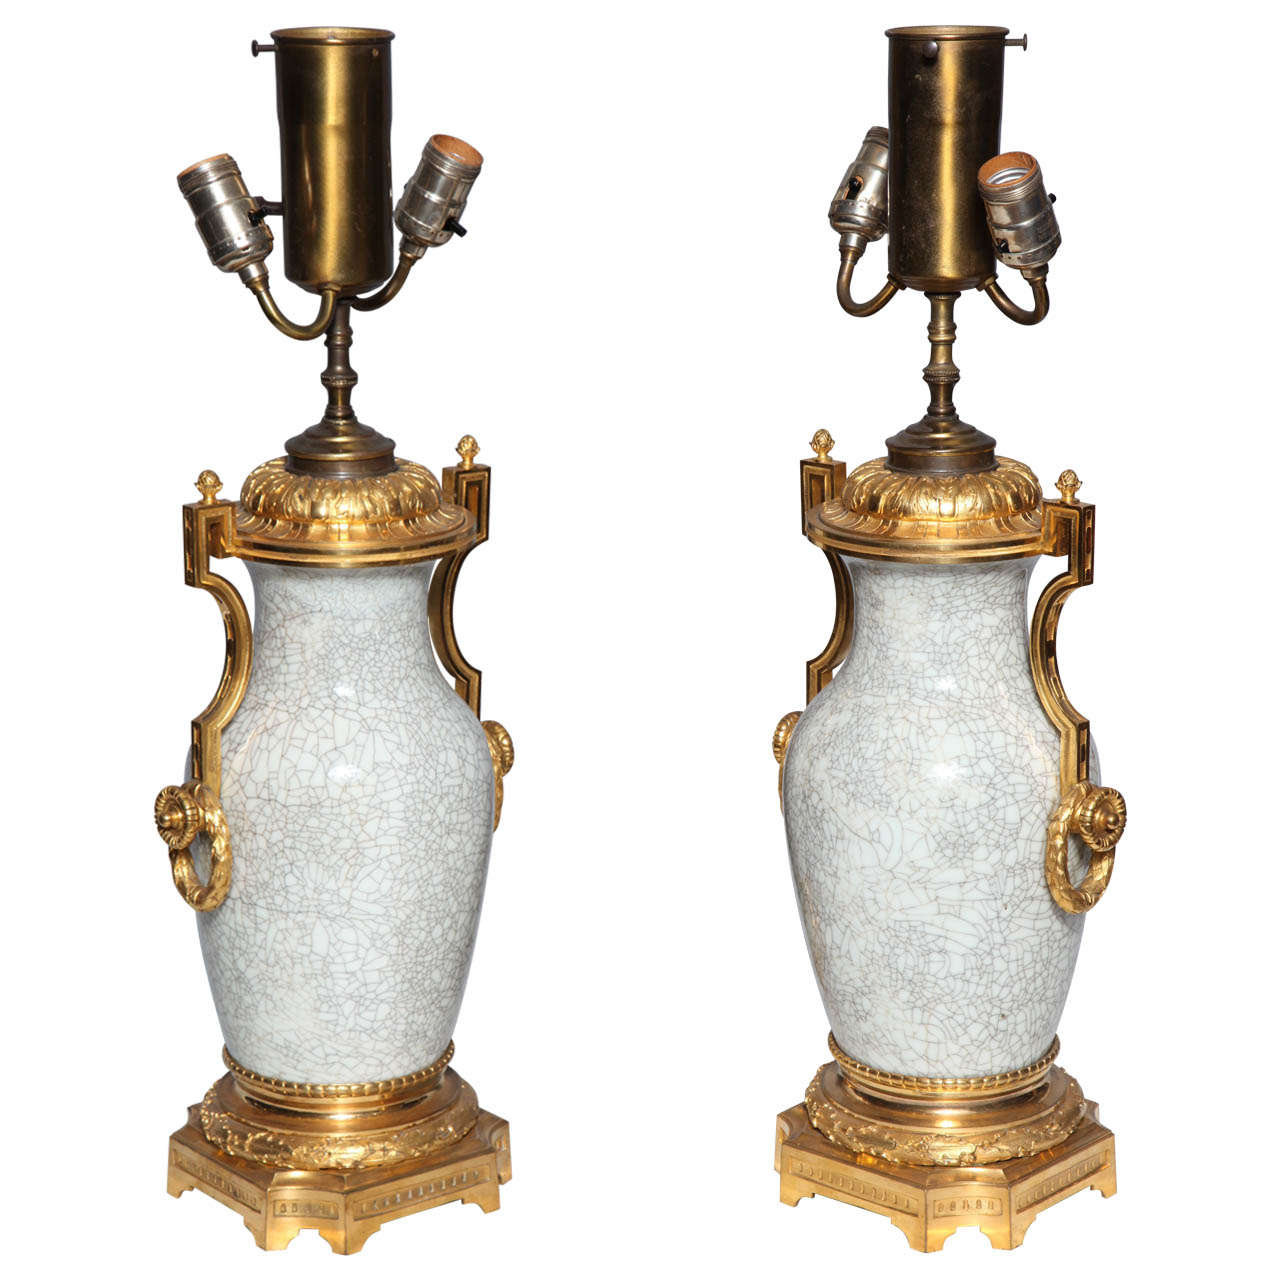 Pair of Chinese, Crackle Finish, Celadon Porcelain Vases with Gilt Bronze Mounts